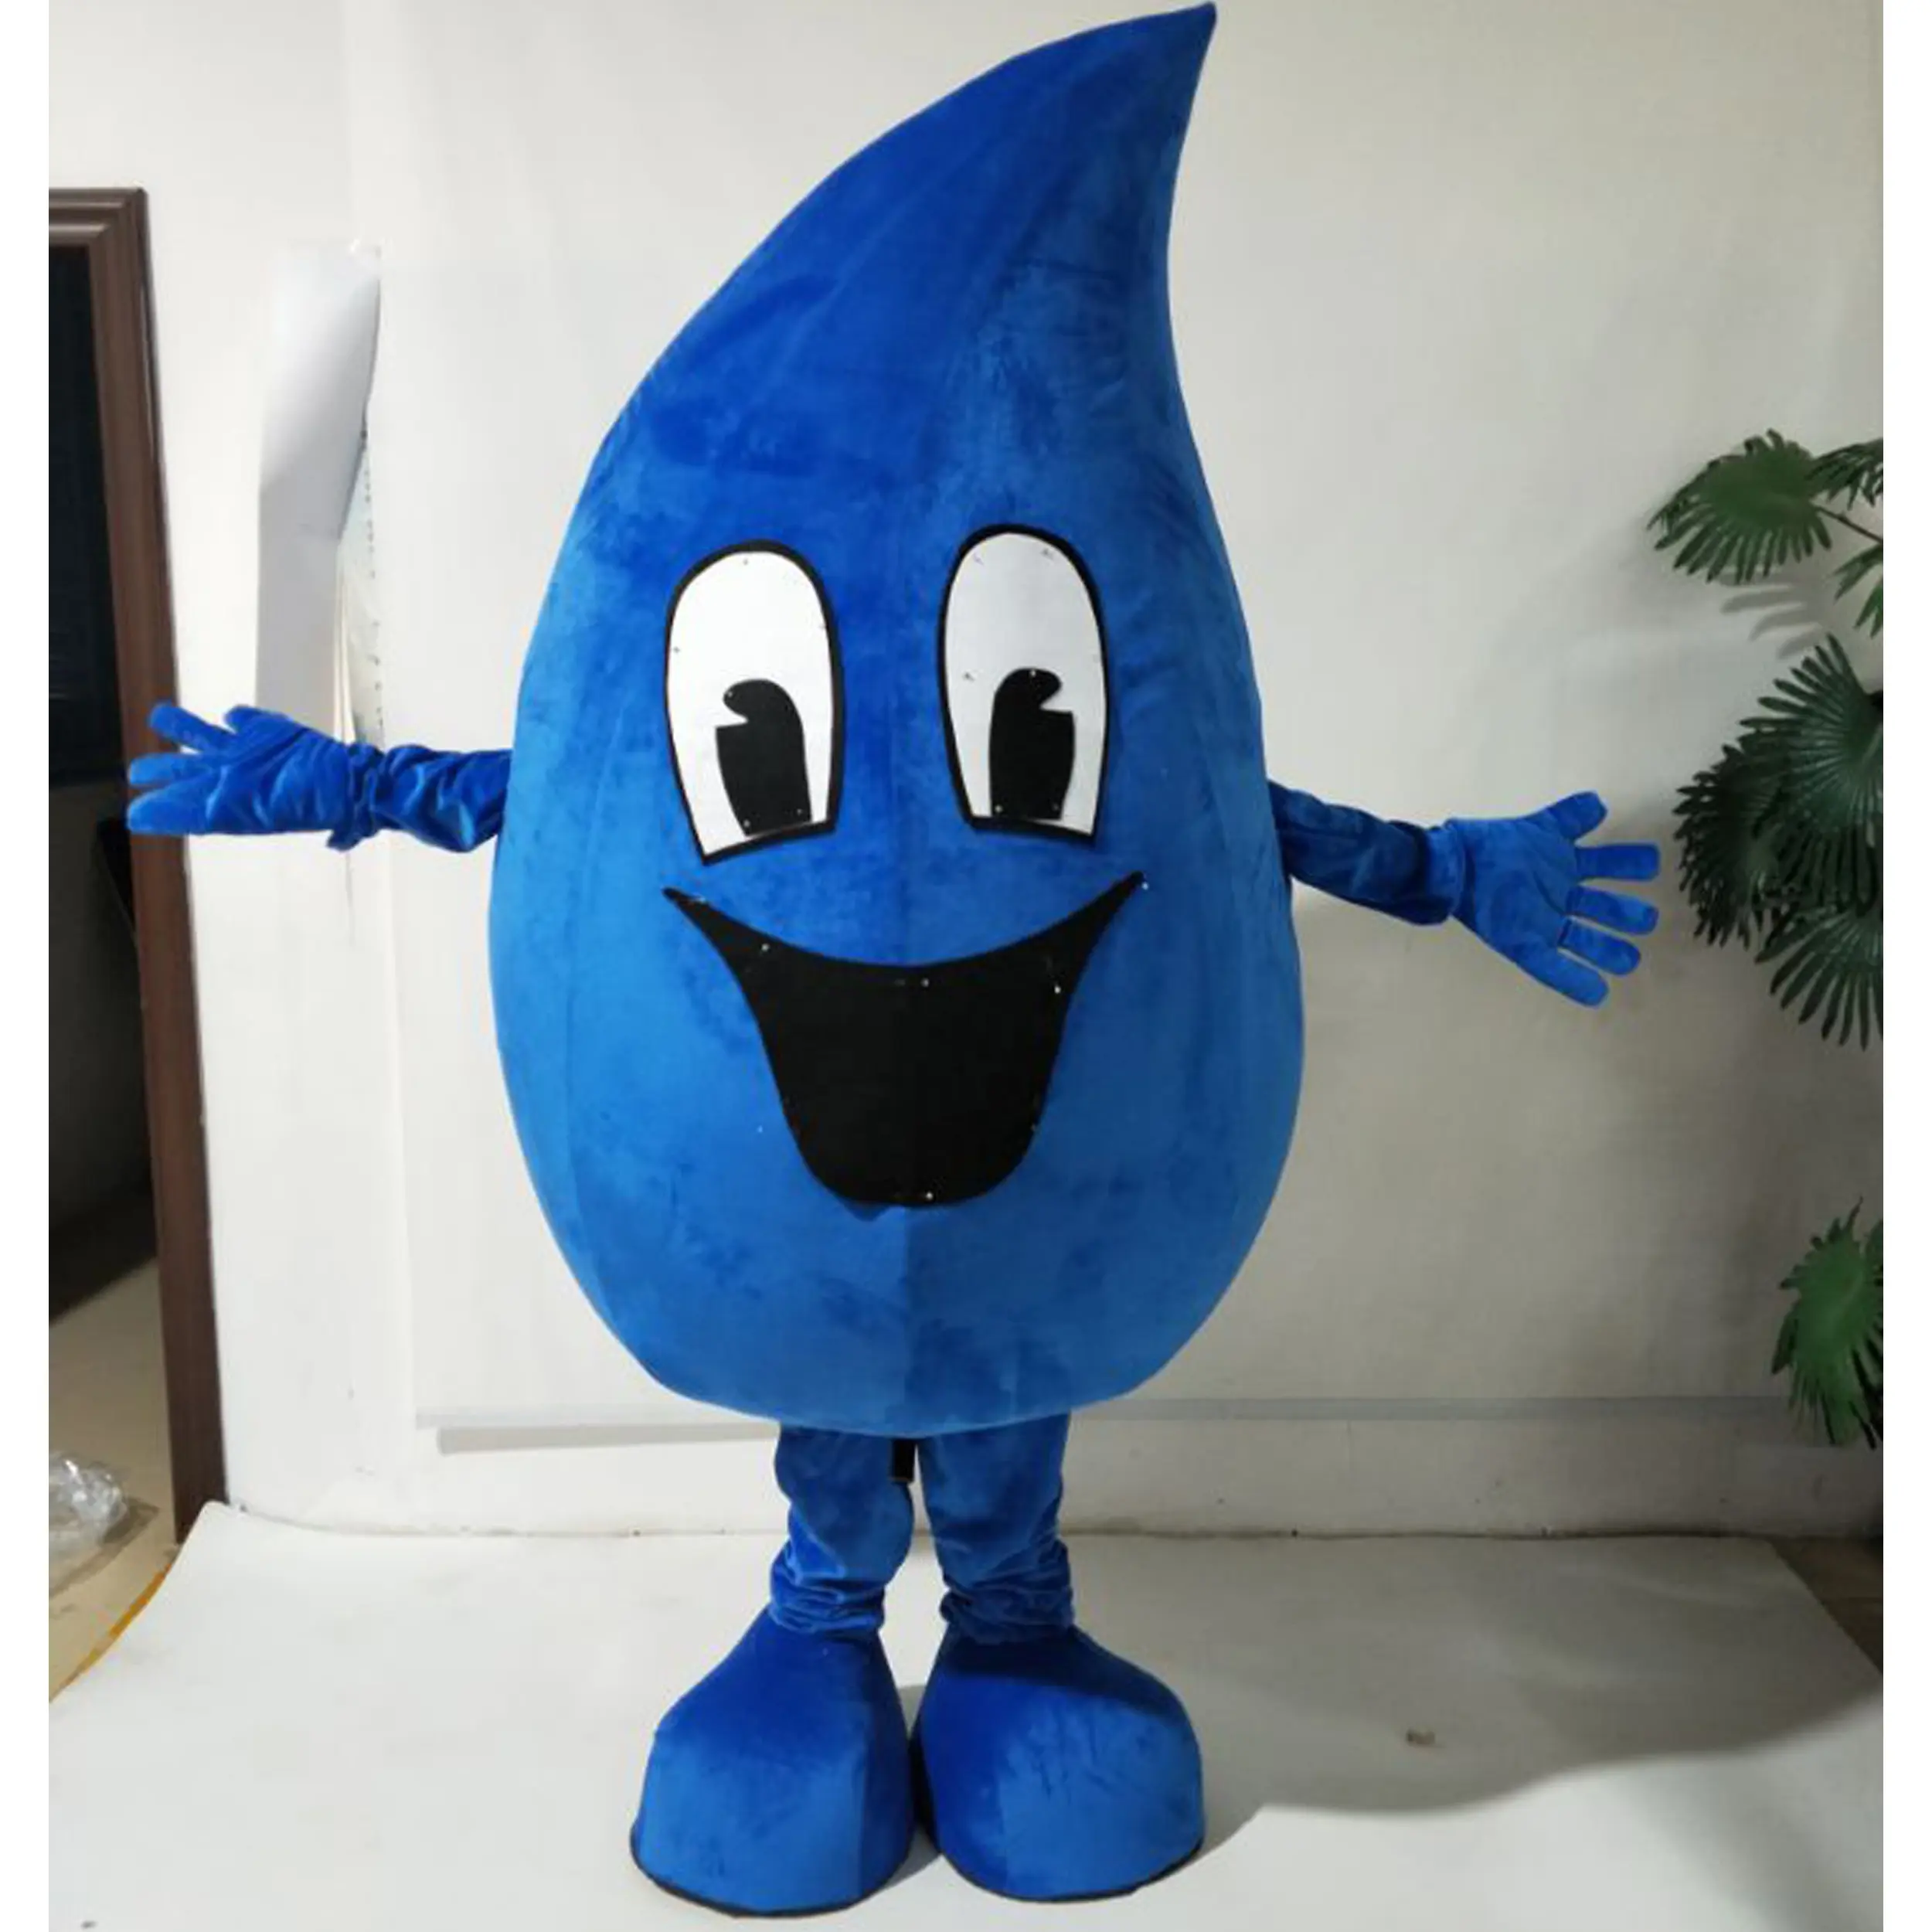 2019 Best selling soft plush water drop custom mascot costumes drip character mascot costumes for kids party